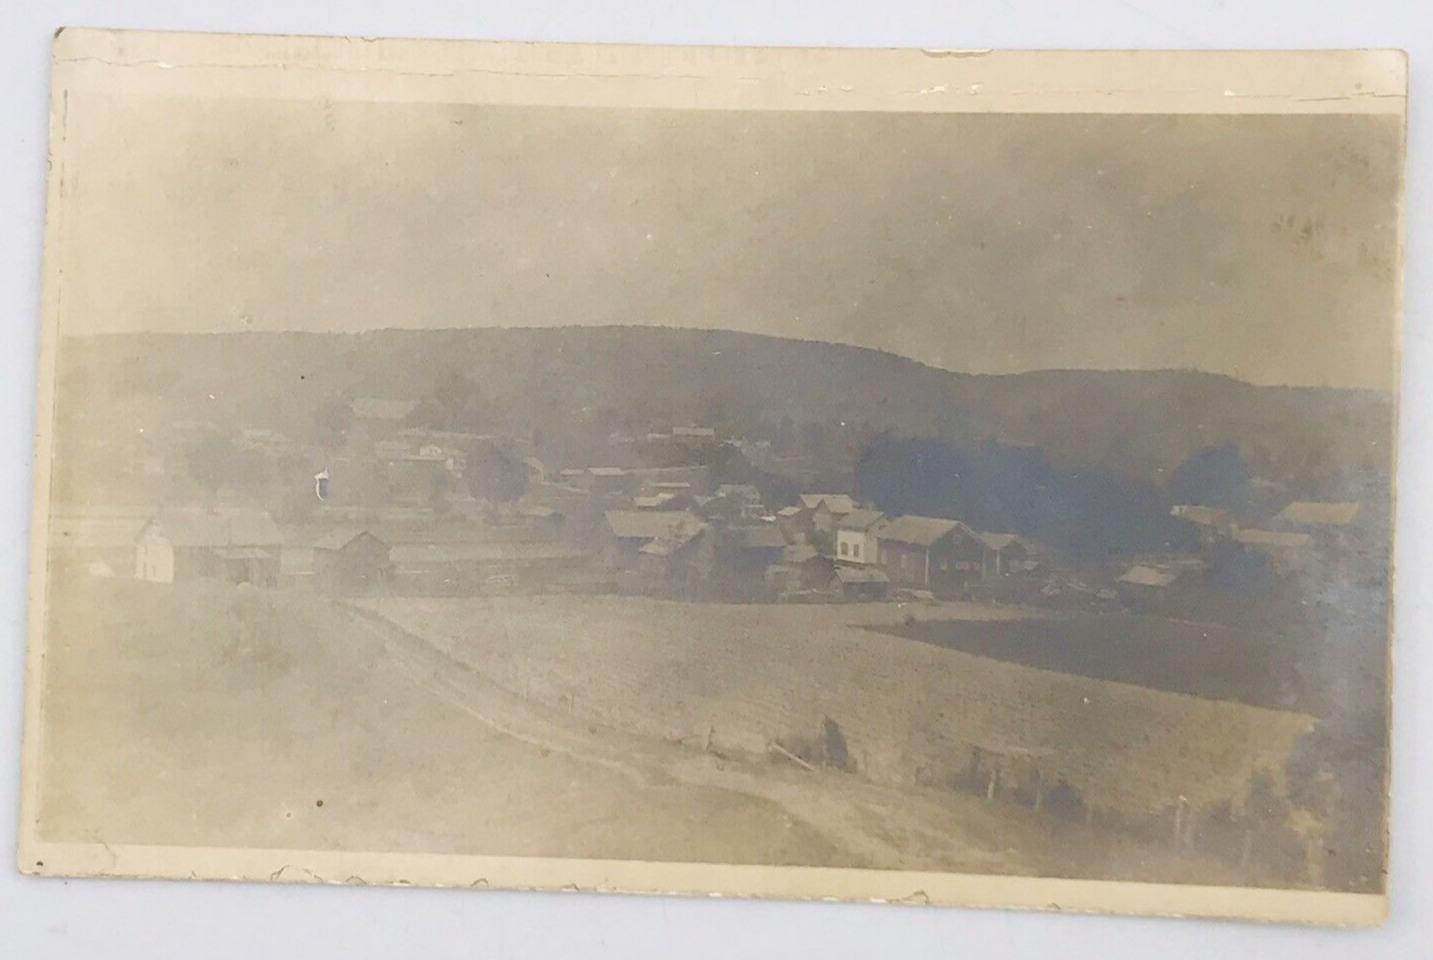 VTG 1908-18 RPPC Country Farm Town USA Unknown Location Real Photo Postcard